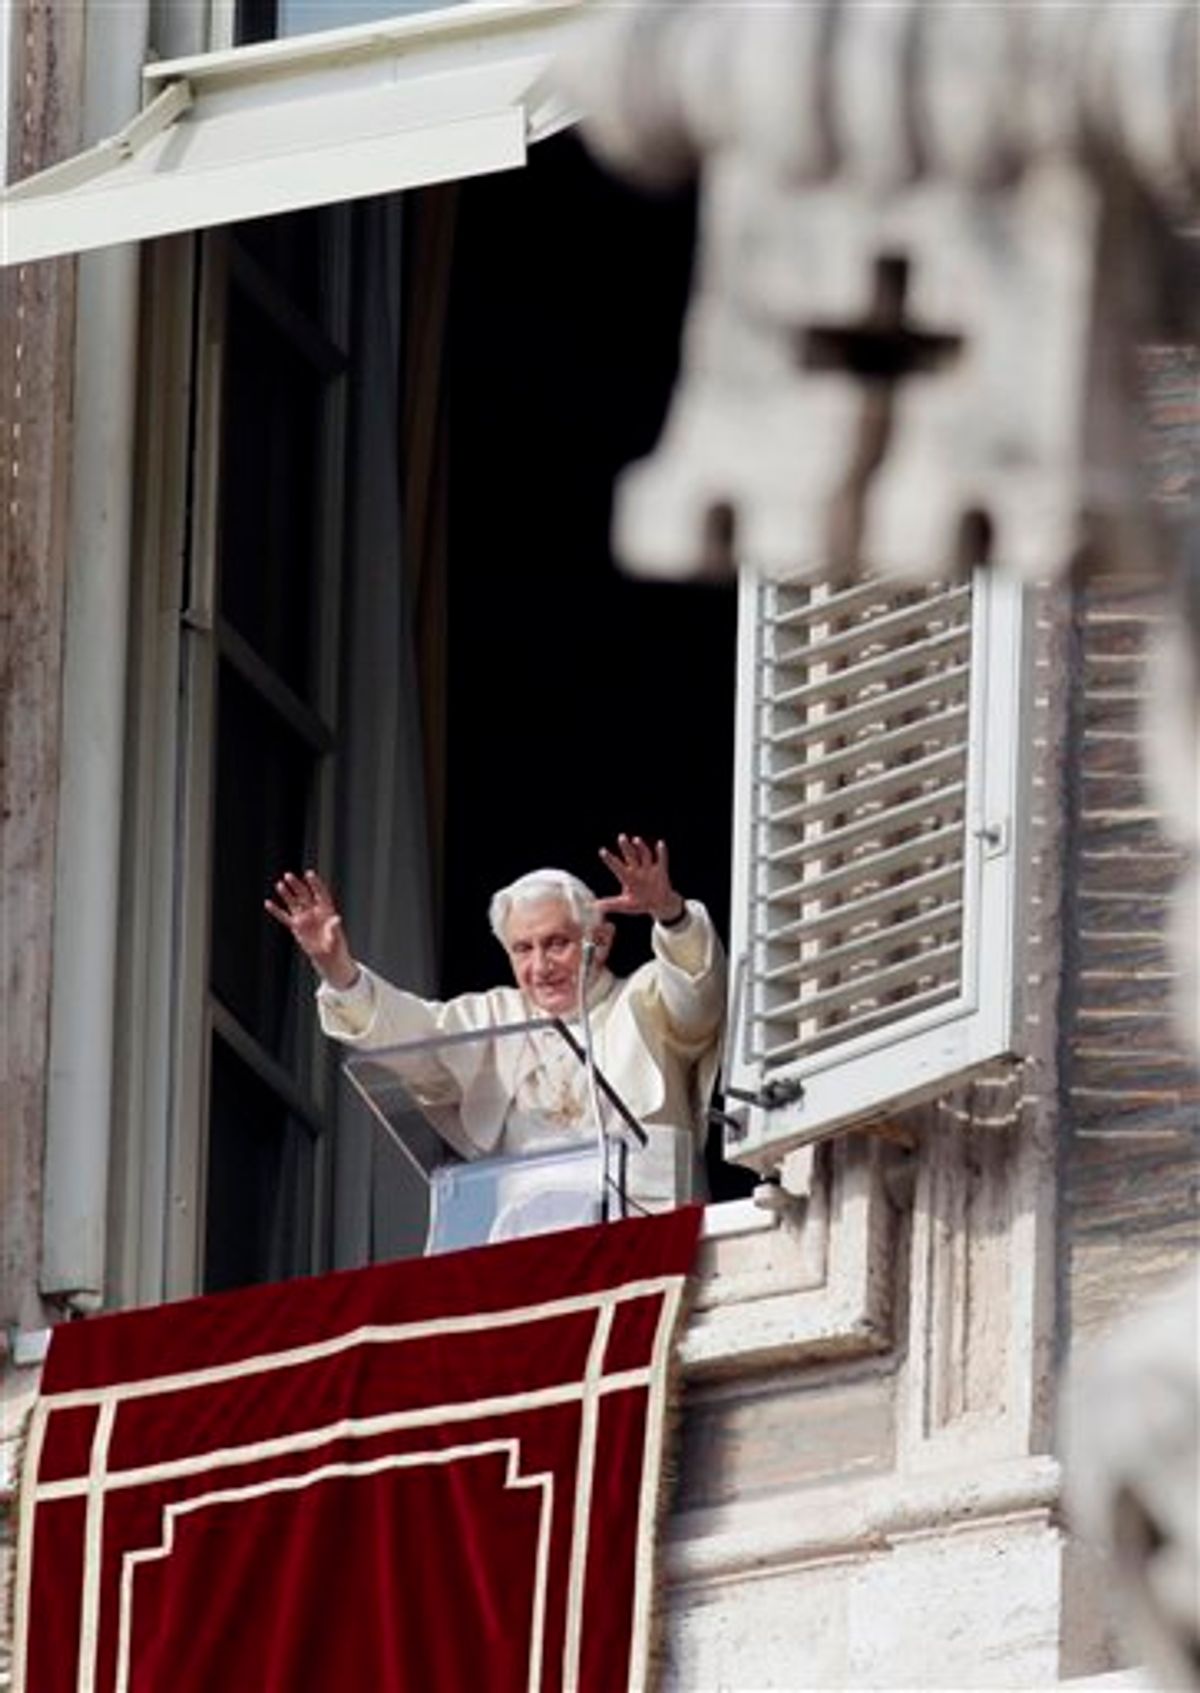 Pope Benedict XVI waves to faithful during the Angelus prayer in St. Peter's square at the Vatican, Sunday, Jan. 2, 2011. (AP Photo/Gregorio Borgia) (AP)